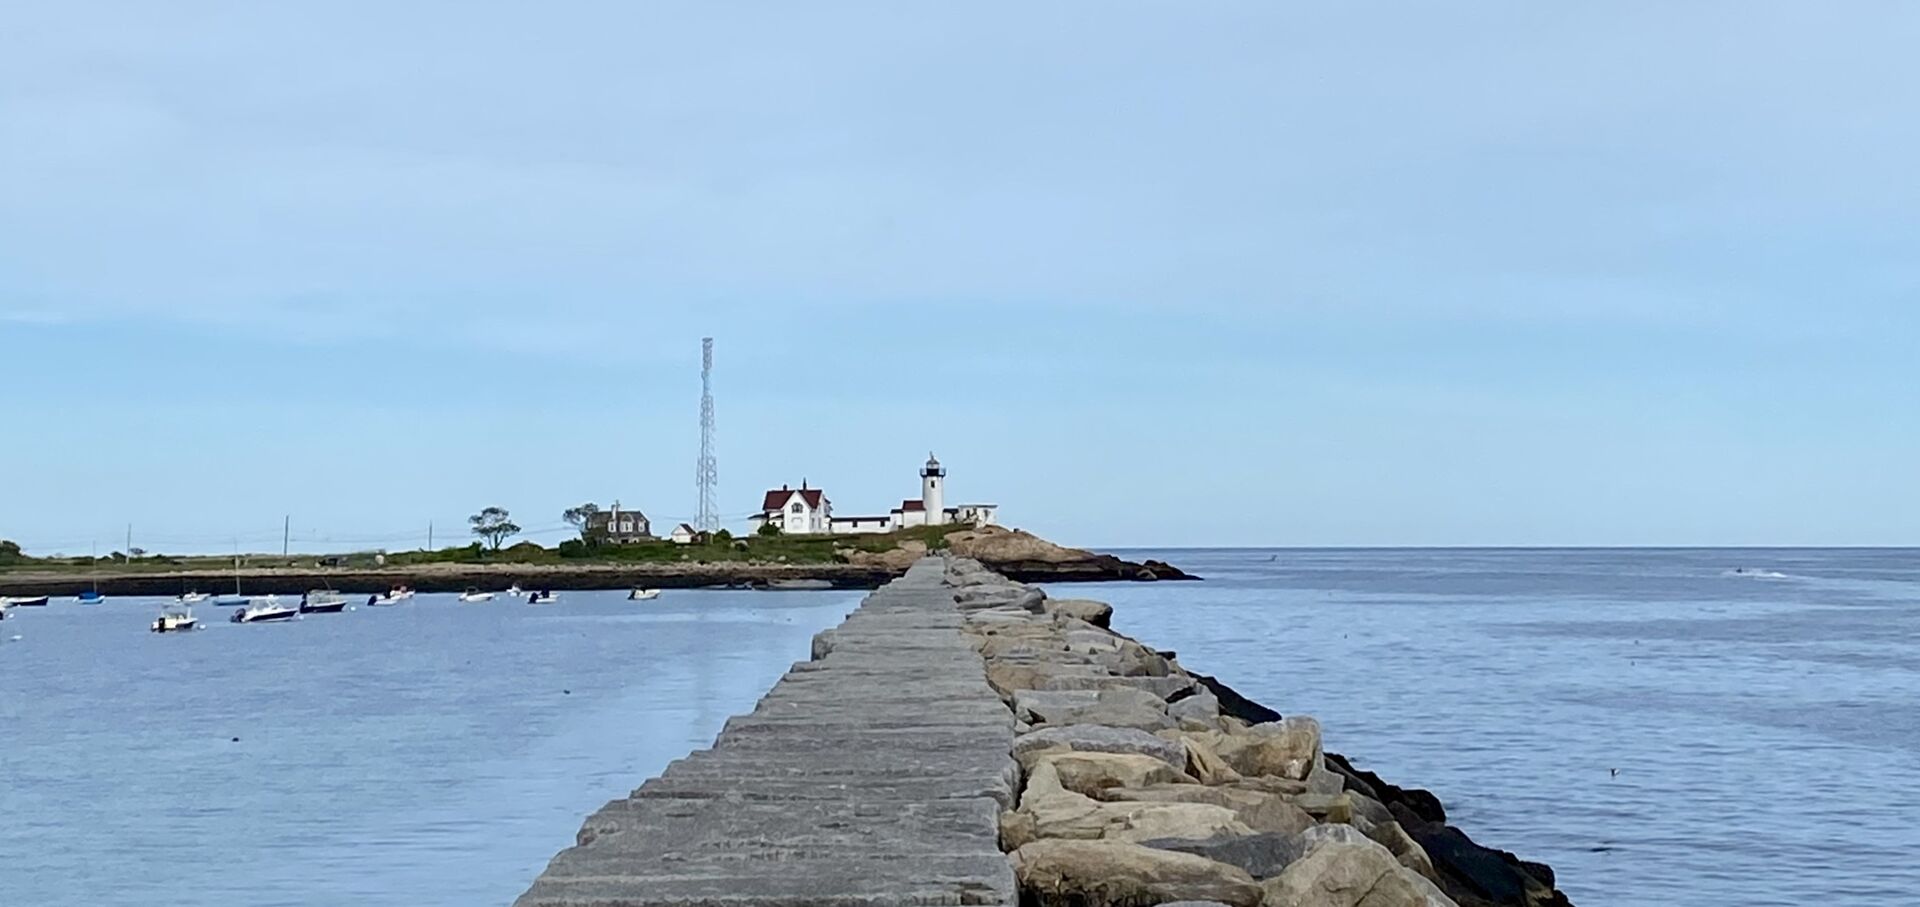 Eastern Point lighthouse was built in 1890, and is still in use today